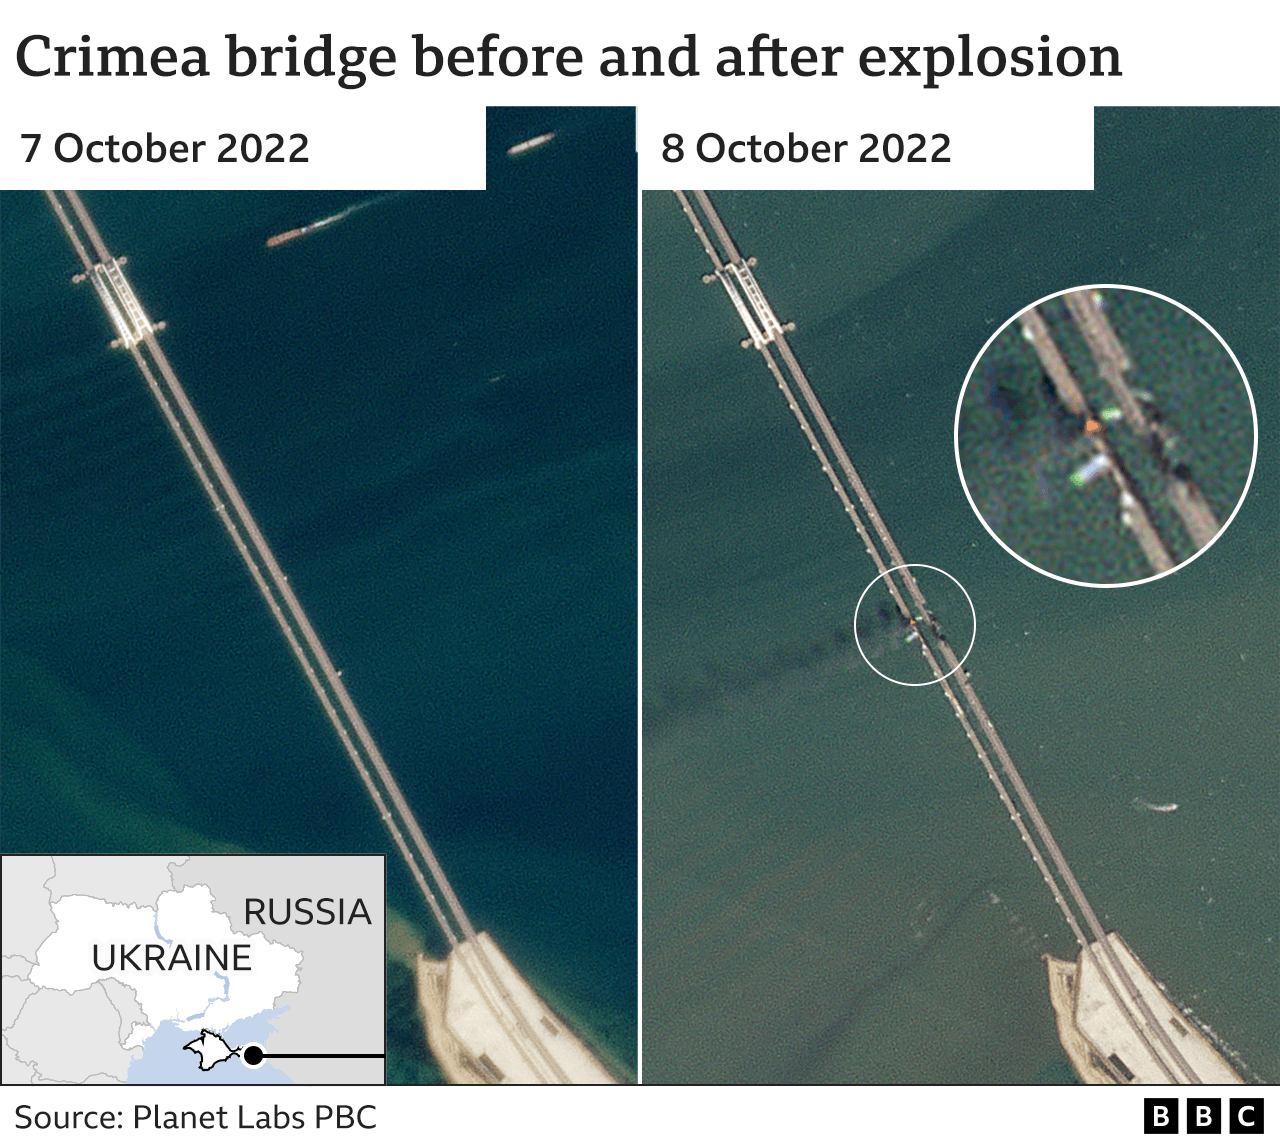 Crimea bridge before and after the explosion